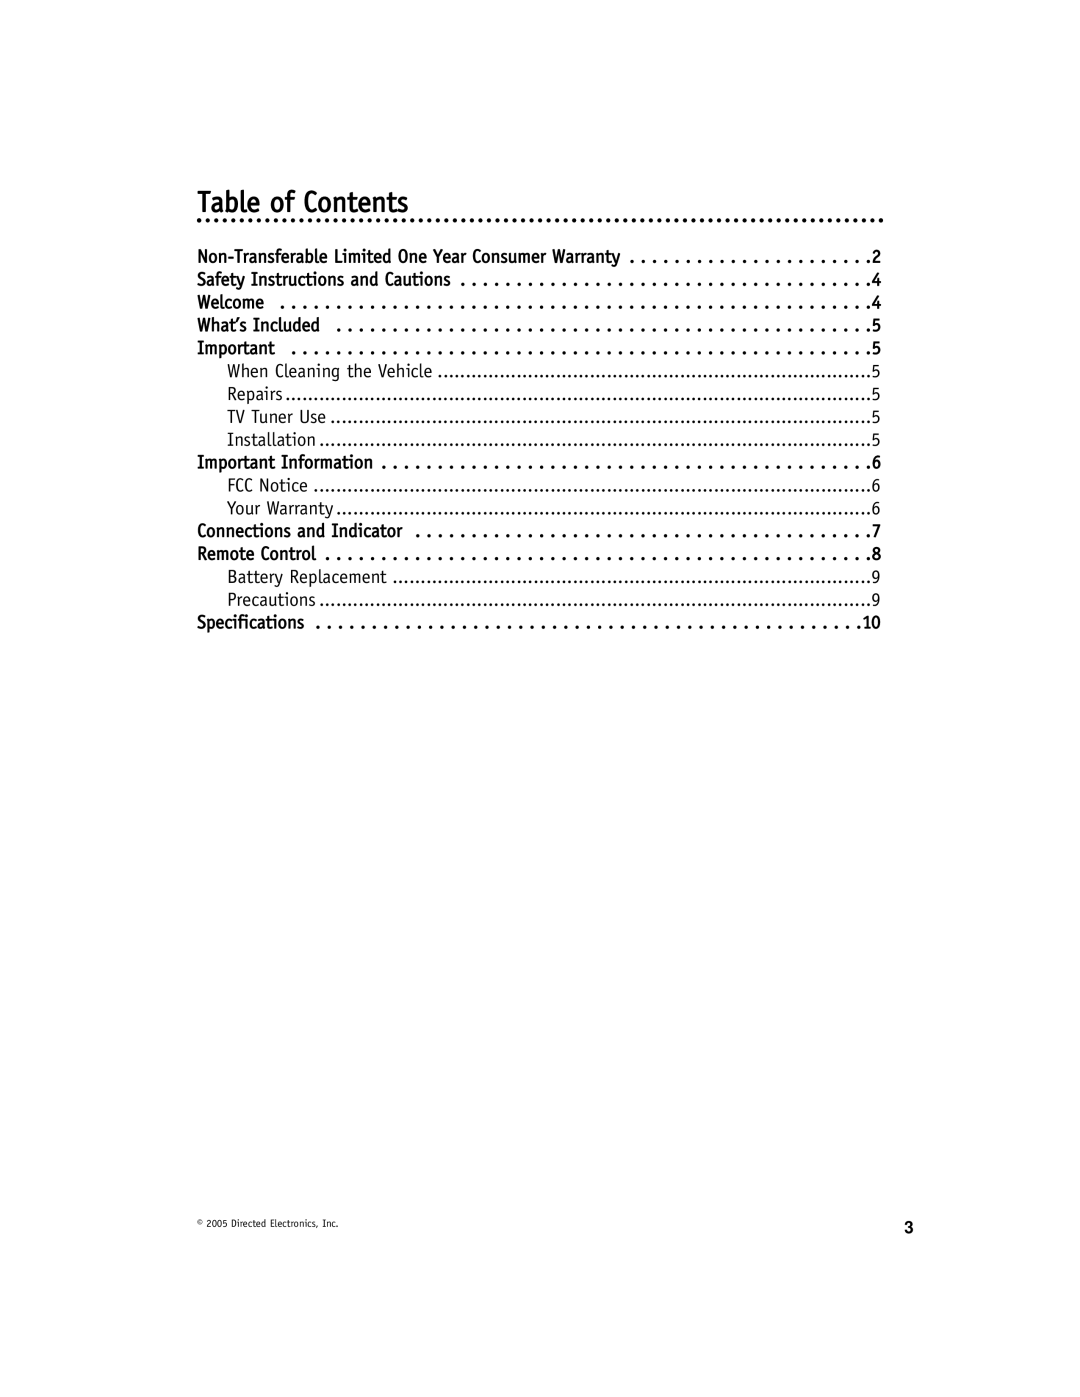 Directed Video TV100 manual Table of Contents 